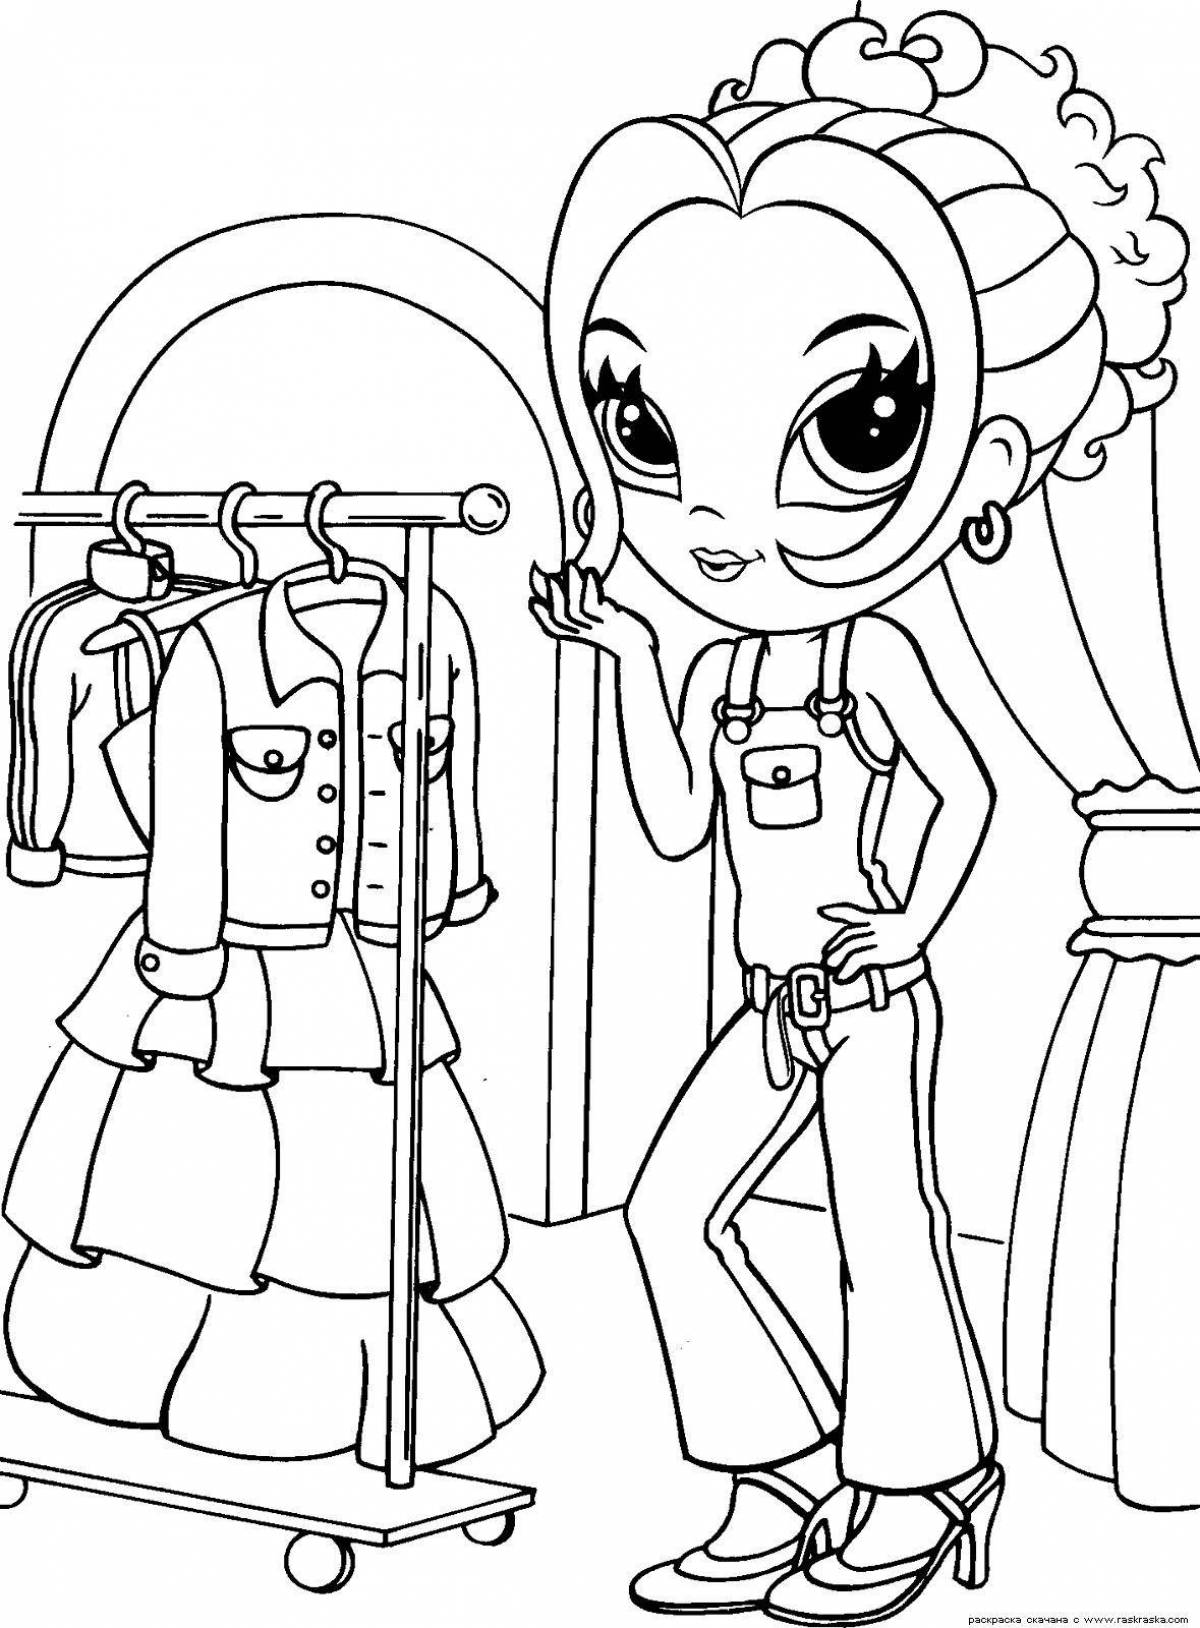 Crazy coloring pages for girls 7 years old